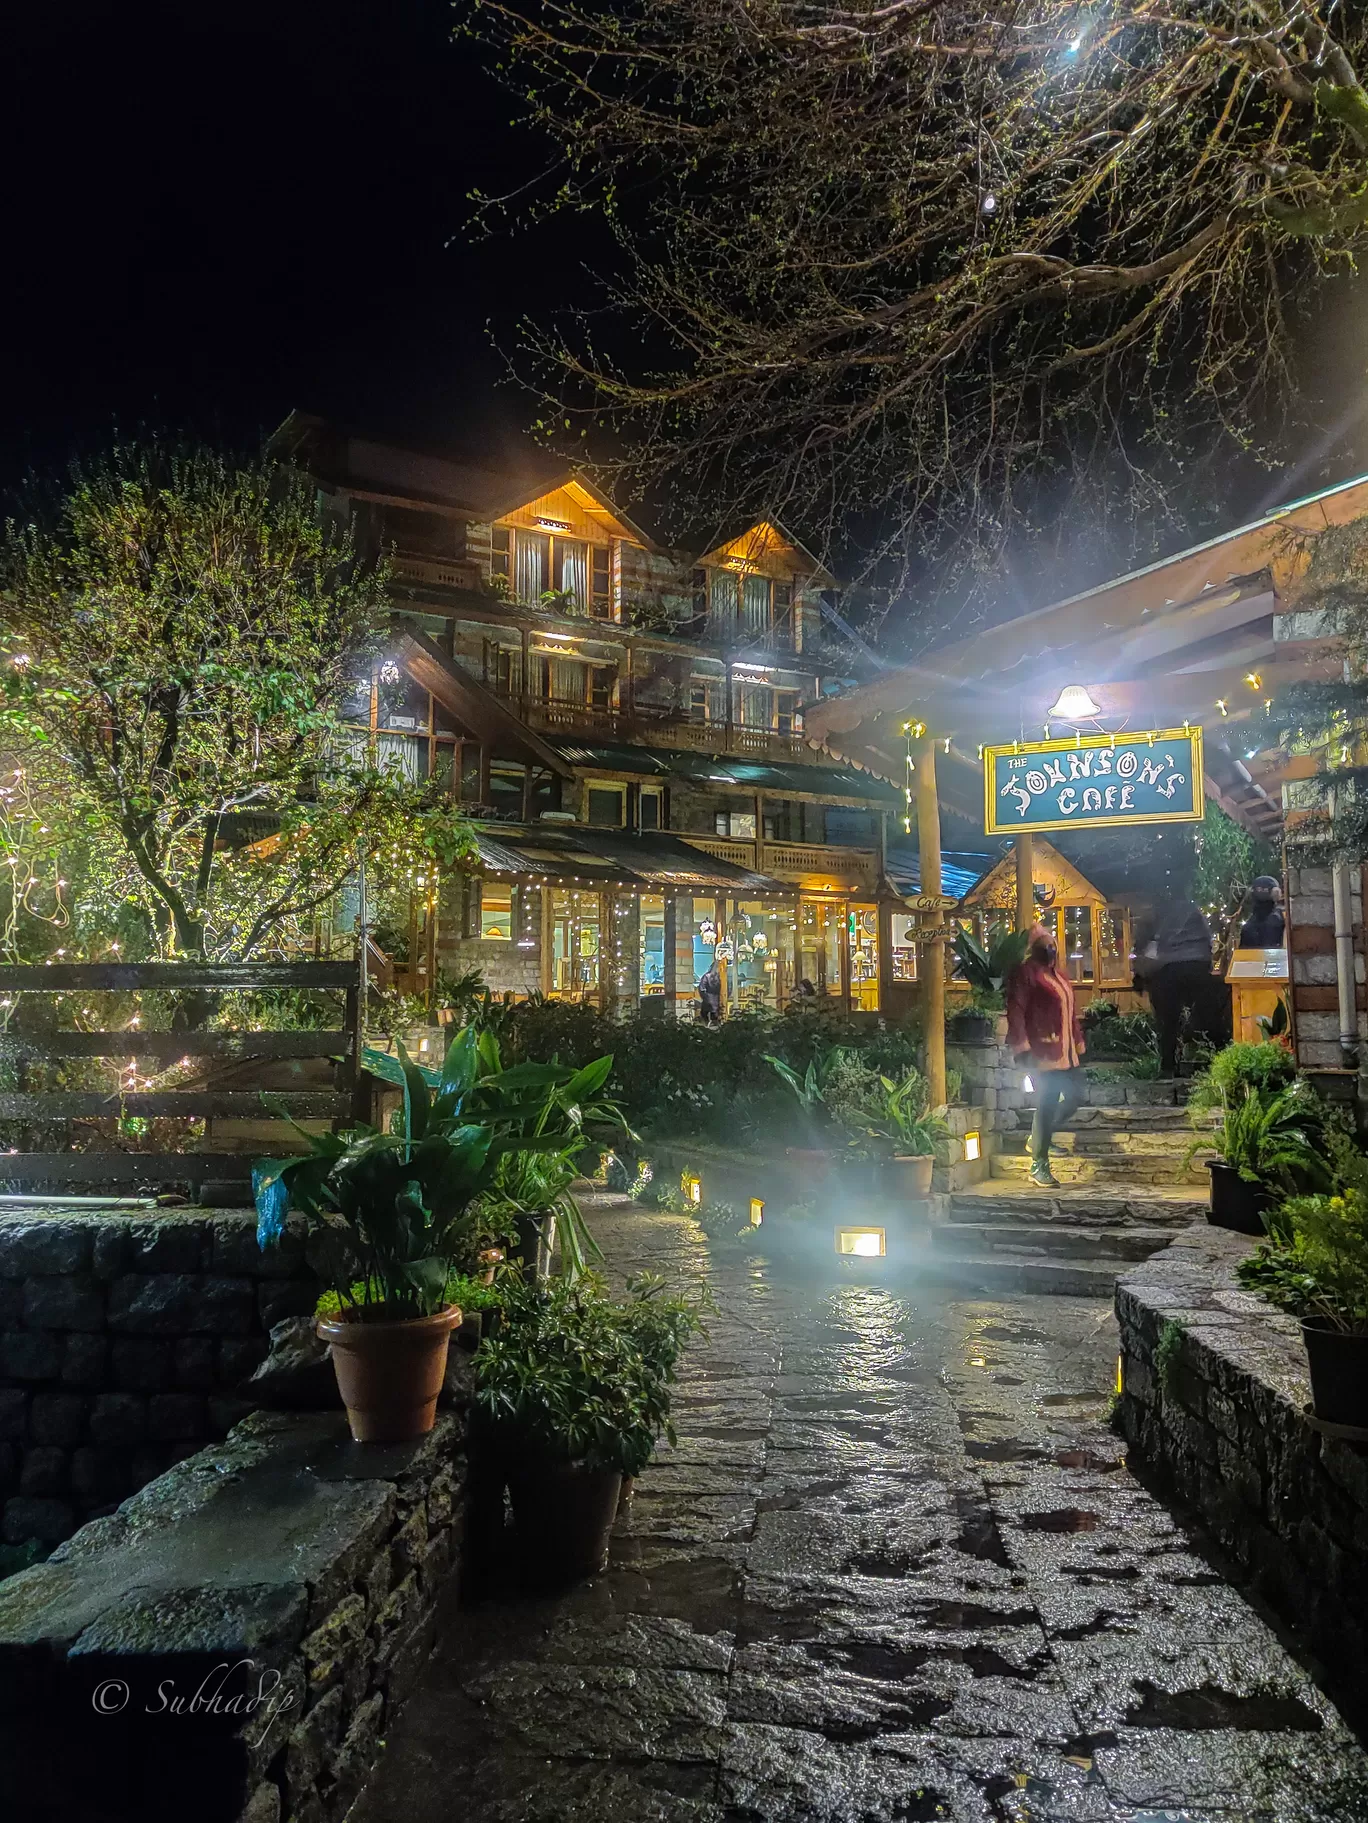 Photo of The Johnson's Cafe and Hotel By Subhadip Hazra